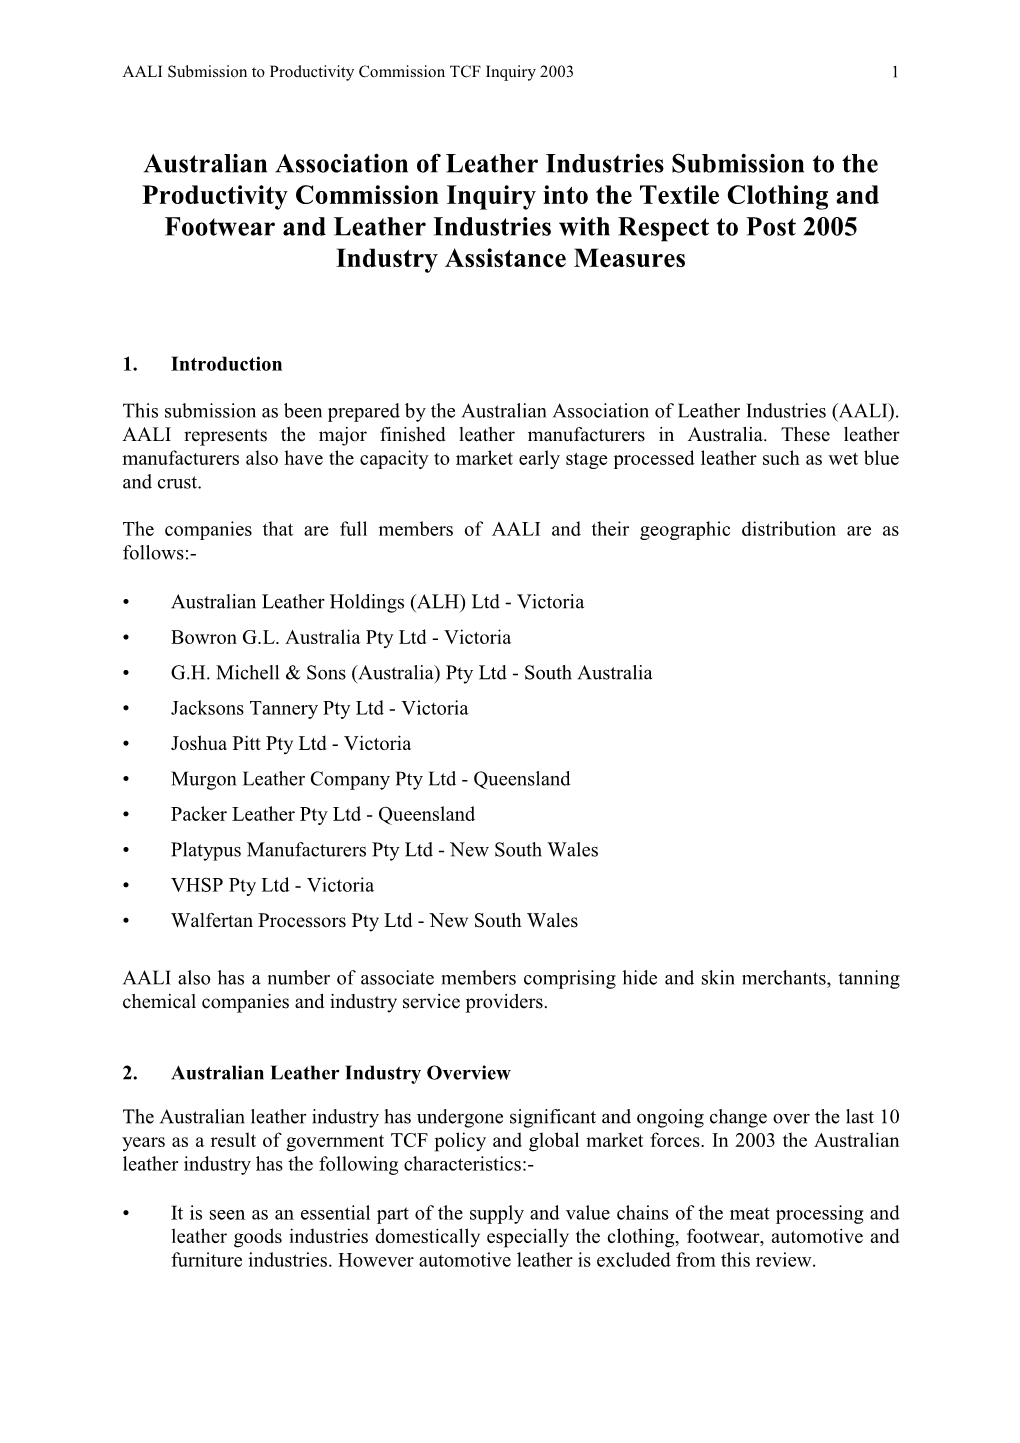 Australian Association of Leather Industries Submission to The